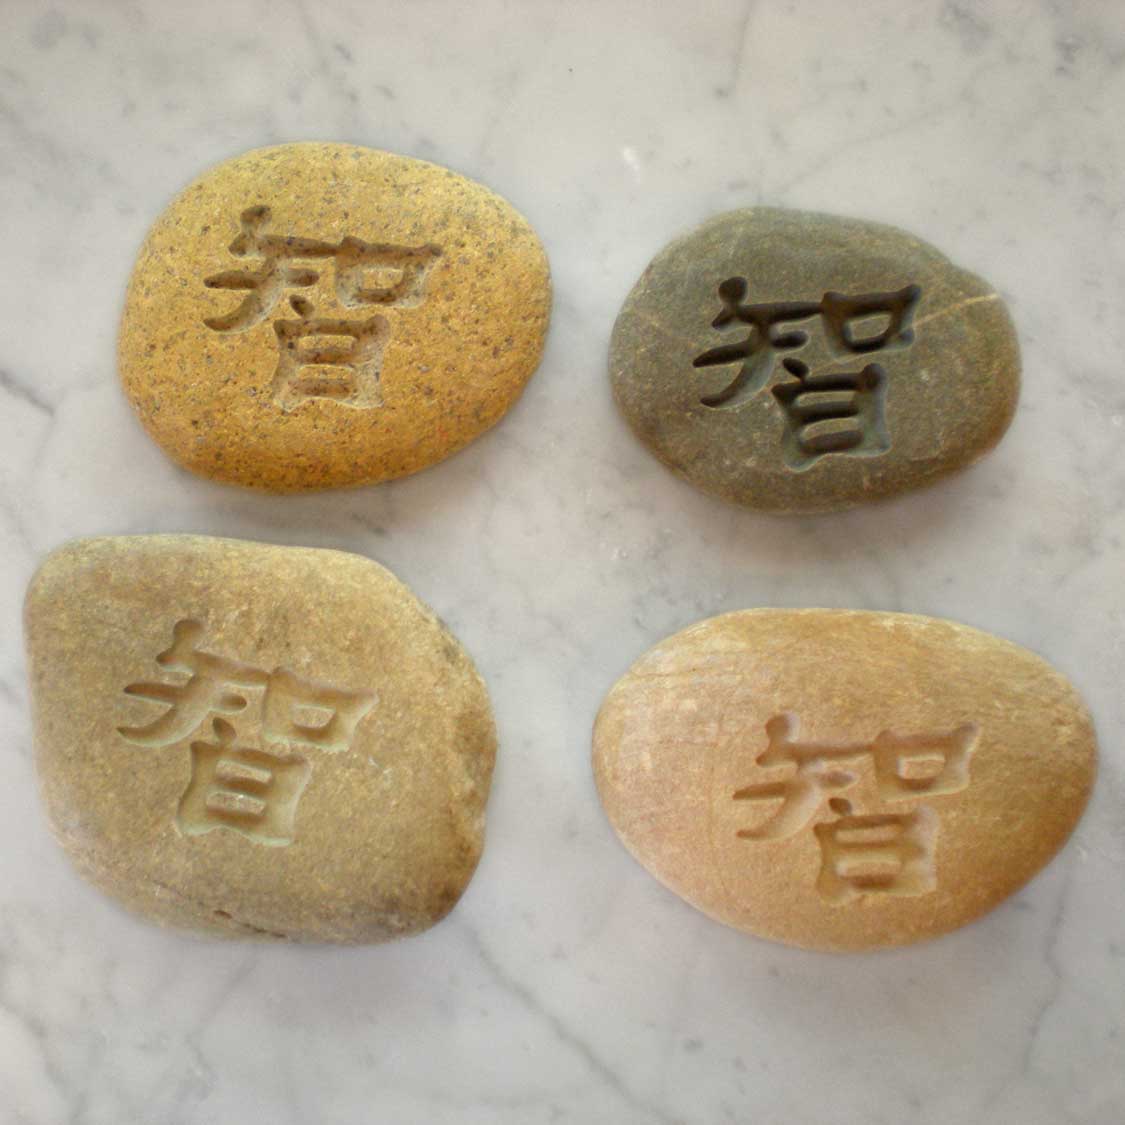 Stone Forest Wisdom Character Pebbles are  each uniquely carved from natural river pebbles image 4 of 8